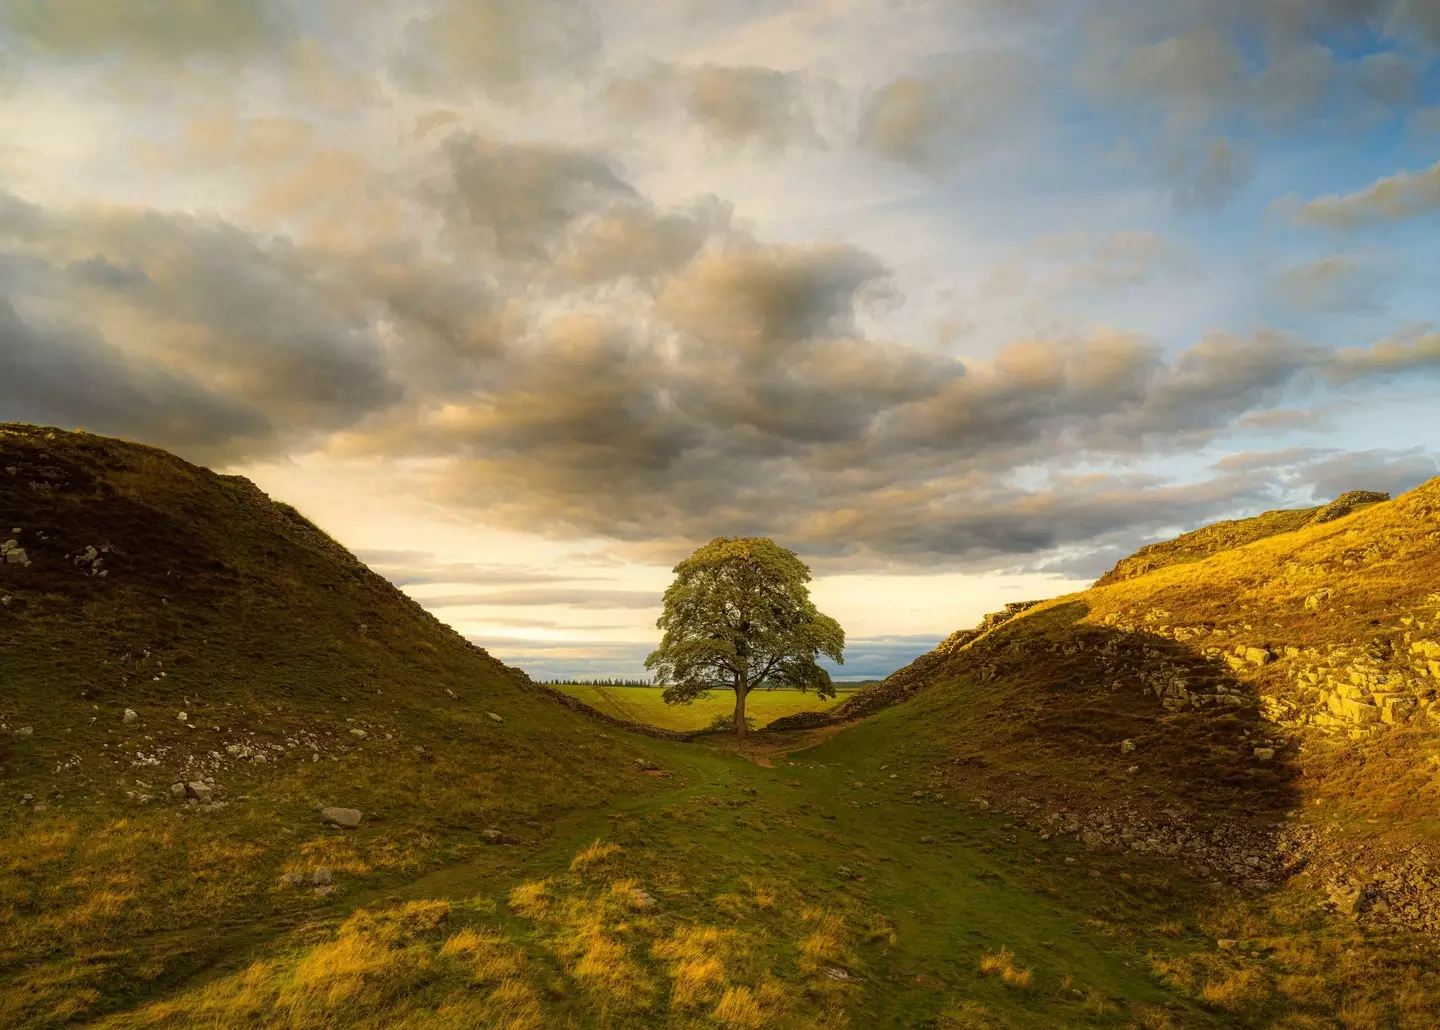 The iconic Sycamore Gap tree.